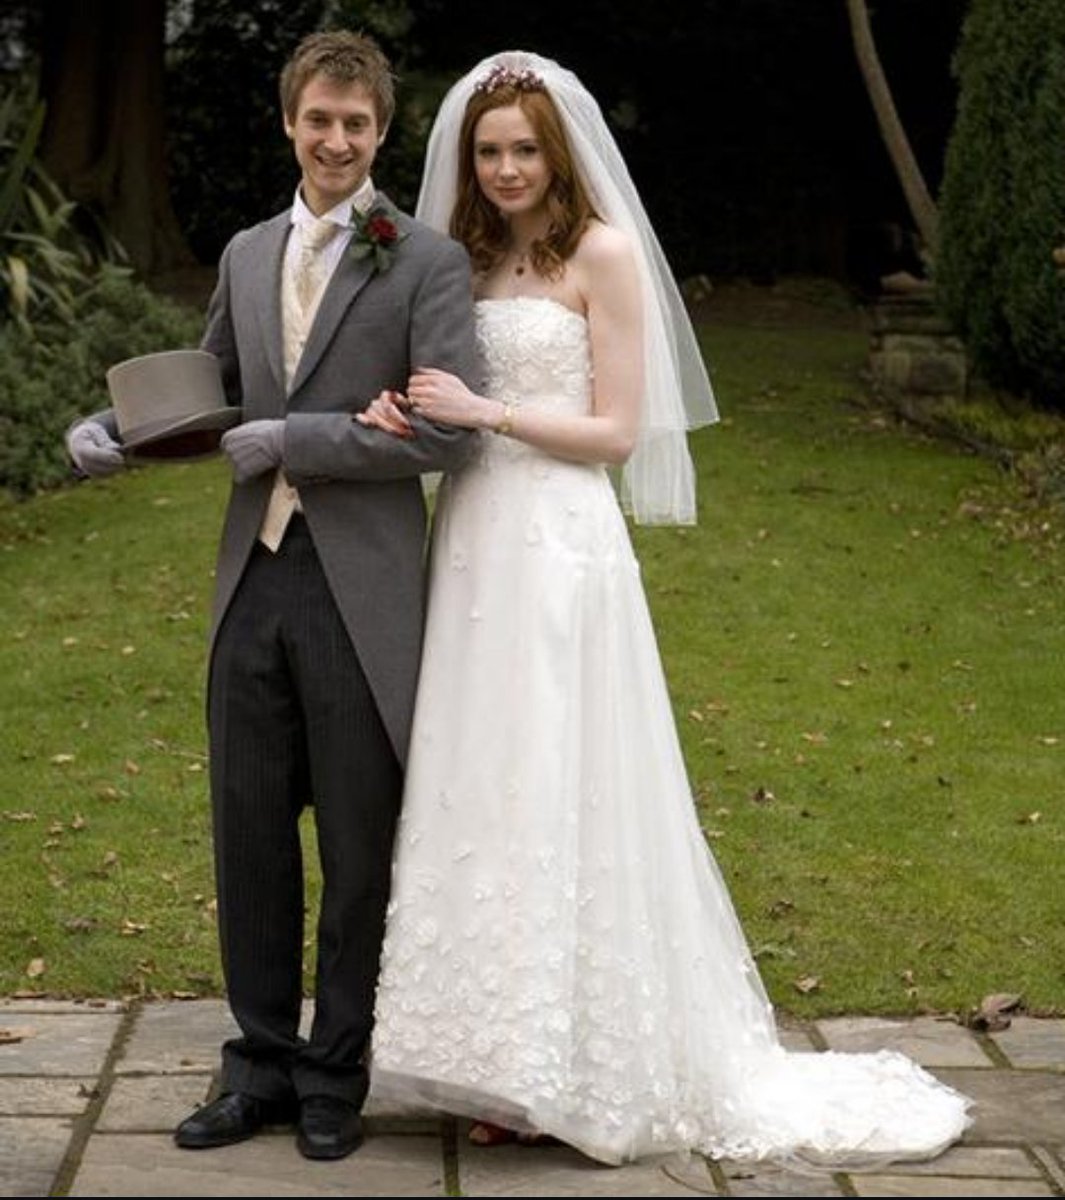 6 years ago today was the Ponds' wedding.Happy 6 year anniversary!#Doc...